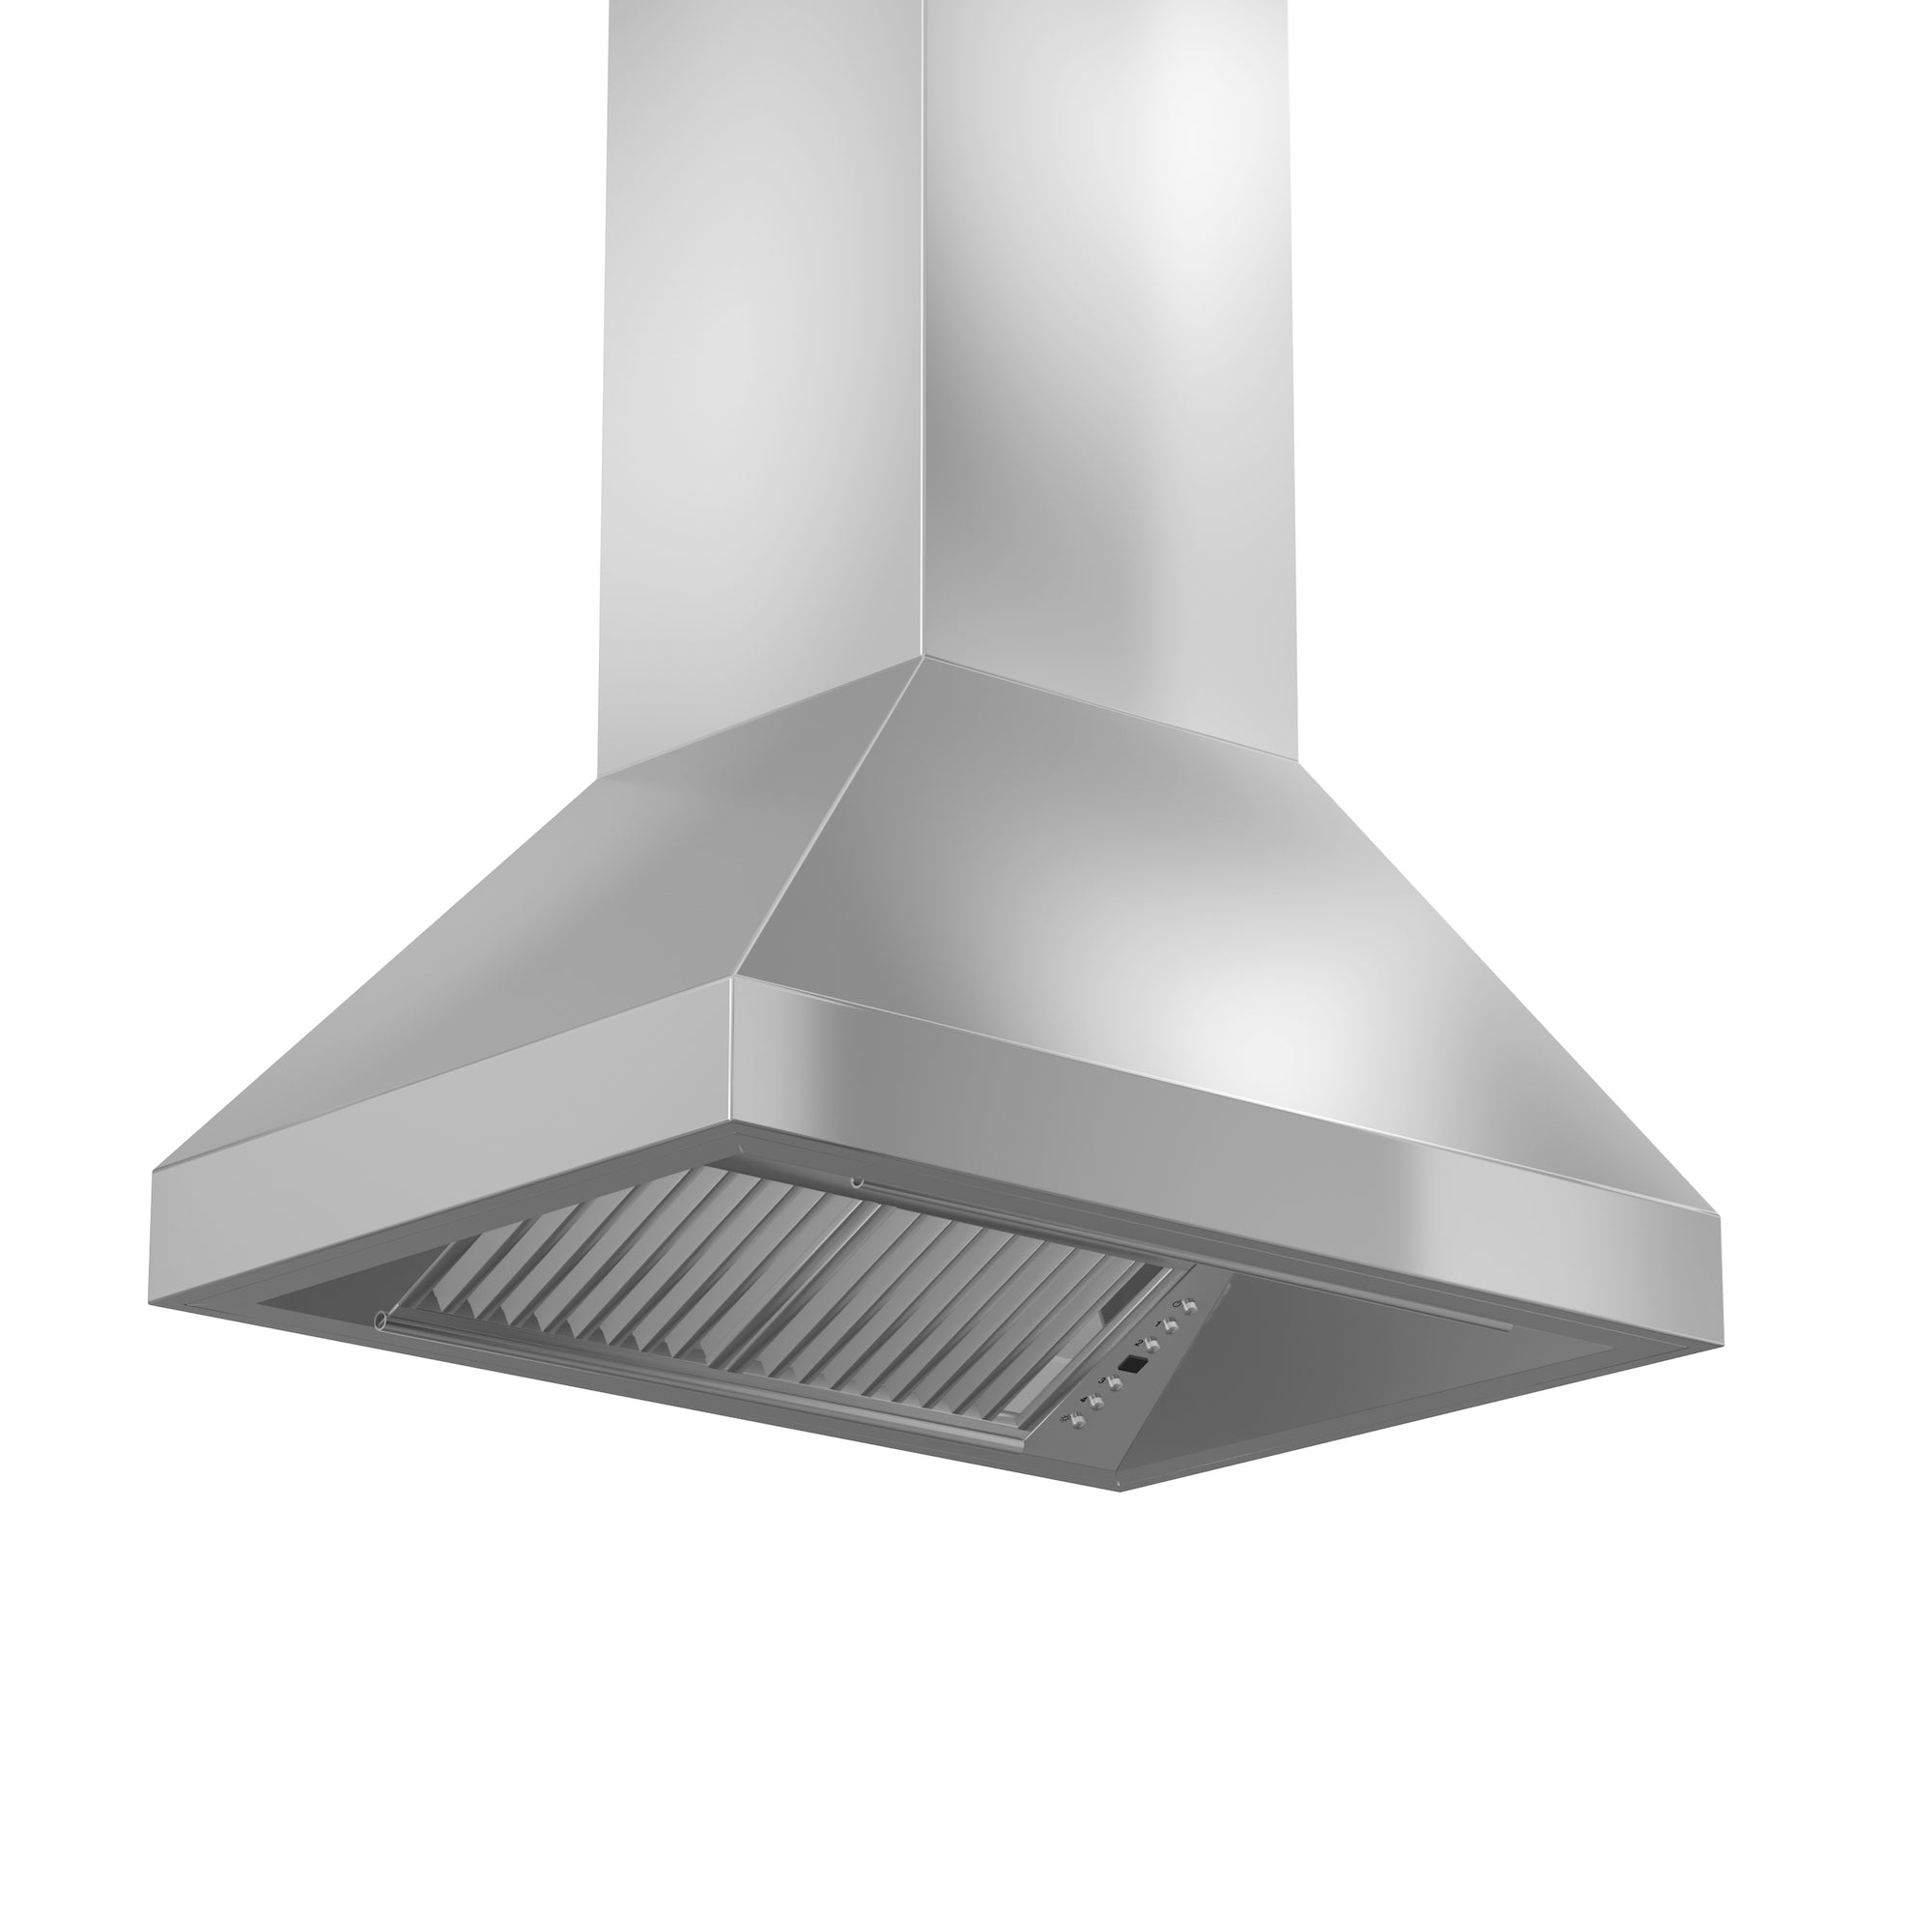 ZLINE 48" Ducted Island Mount Range Hood with Single Remote Blower in Stainless Steel (597i-RS-48-400)